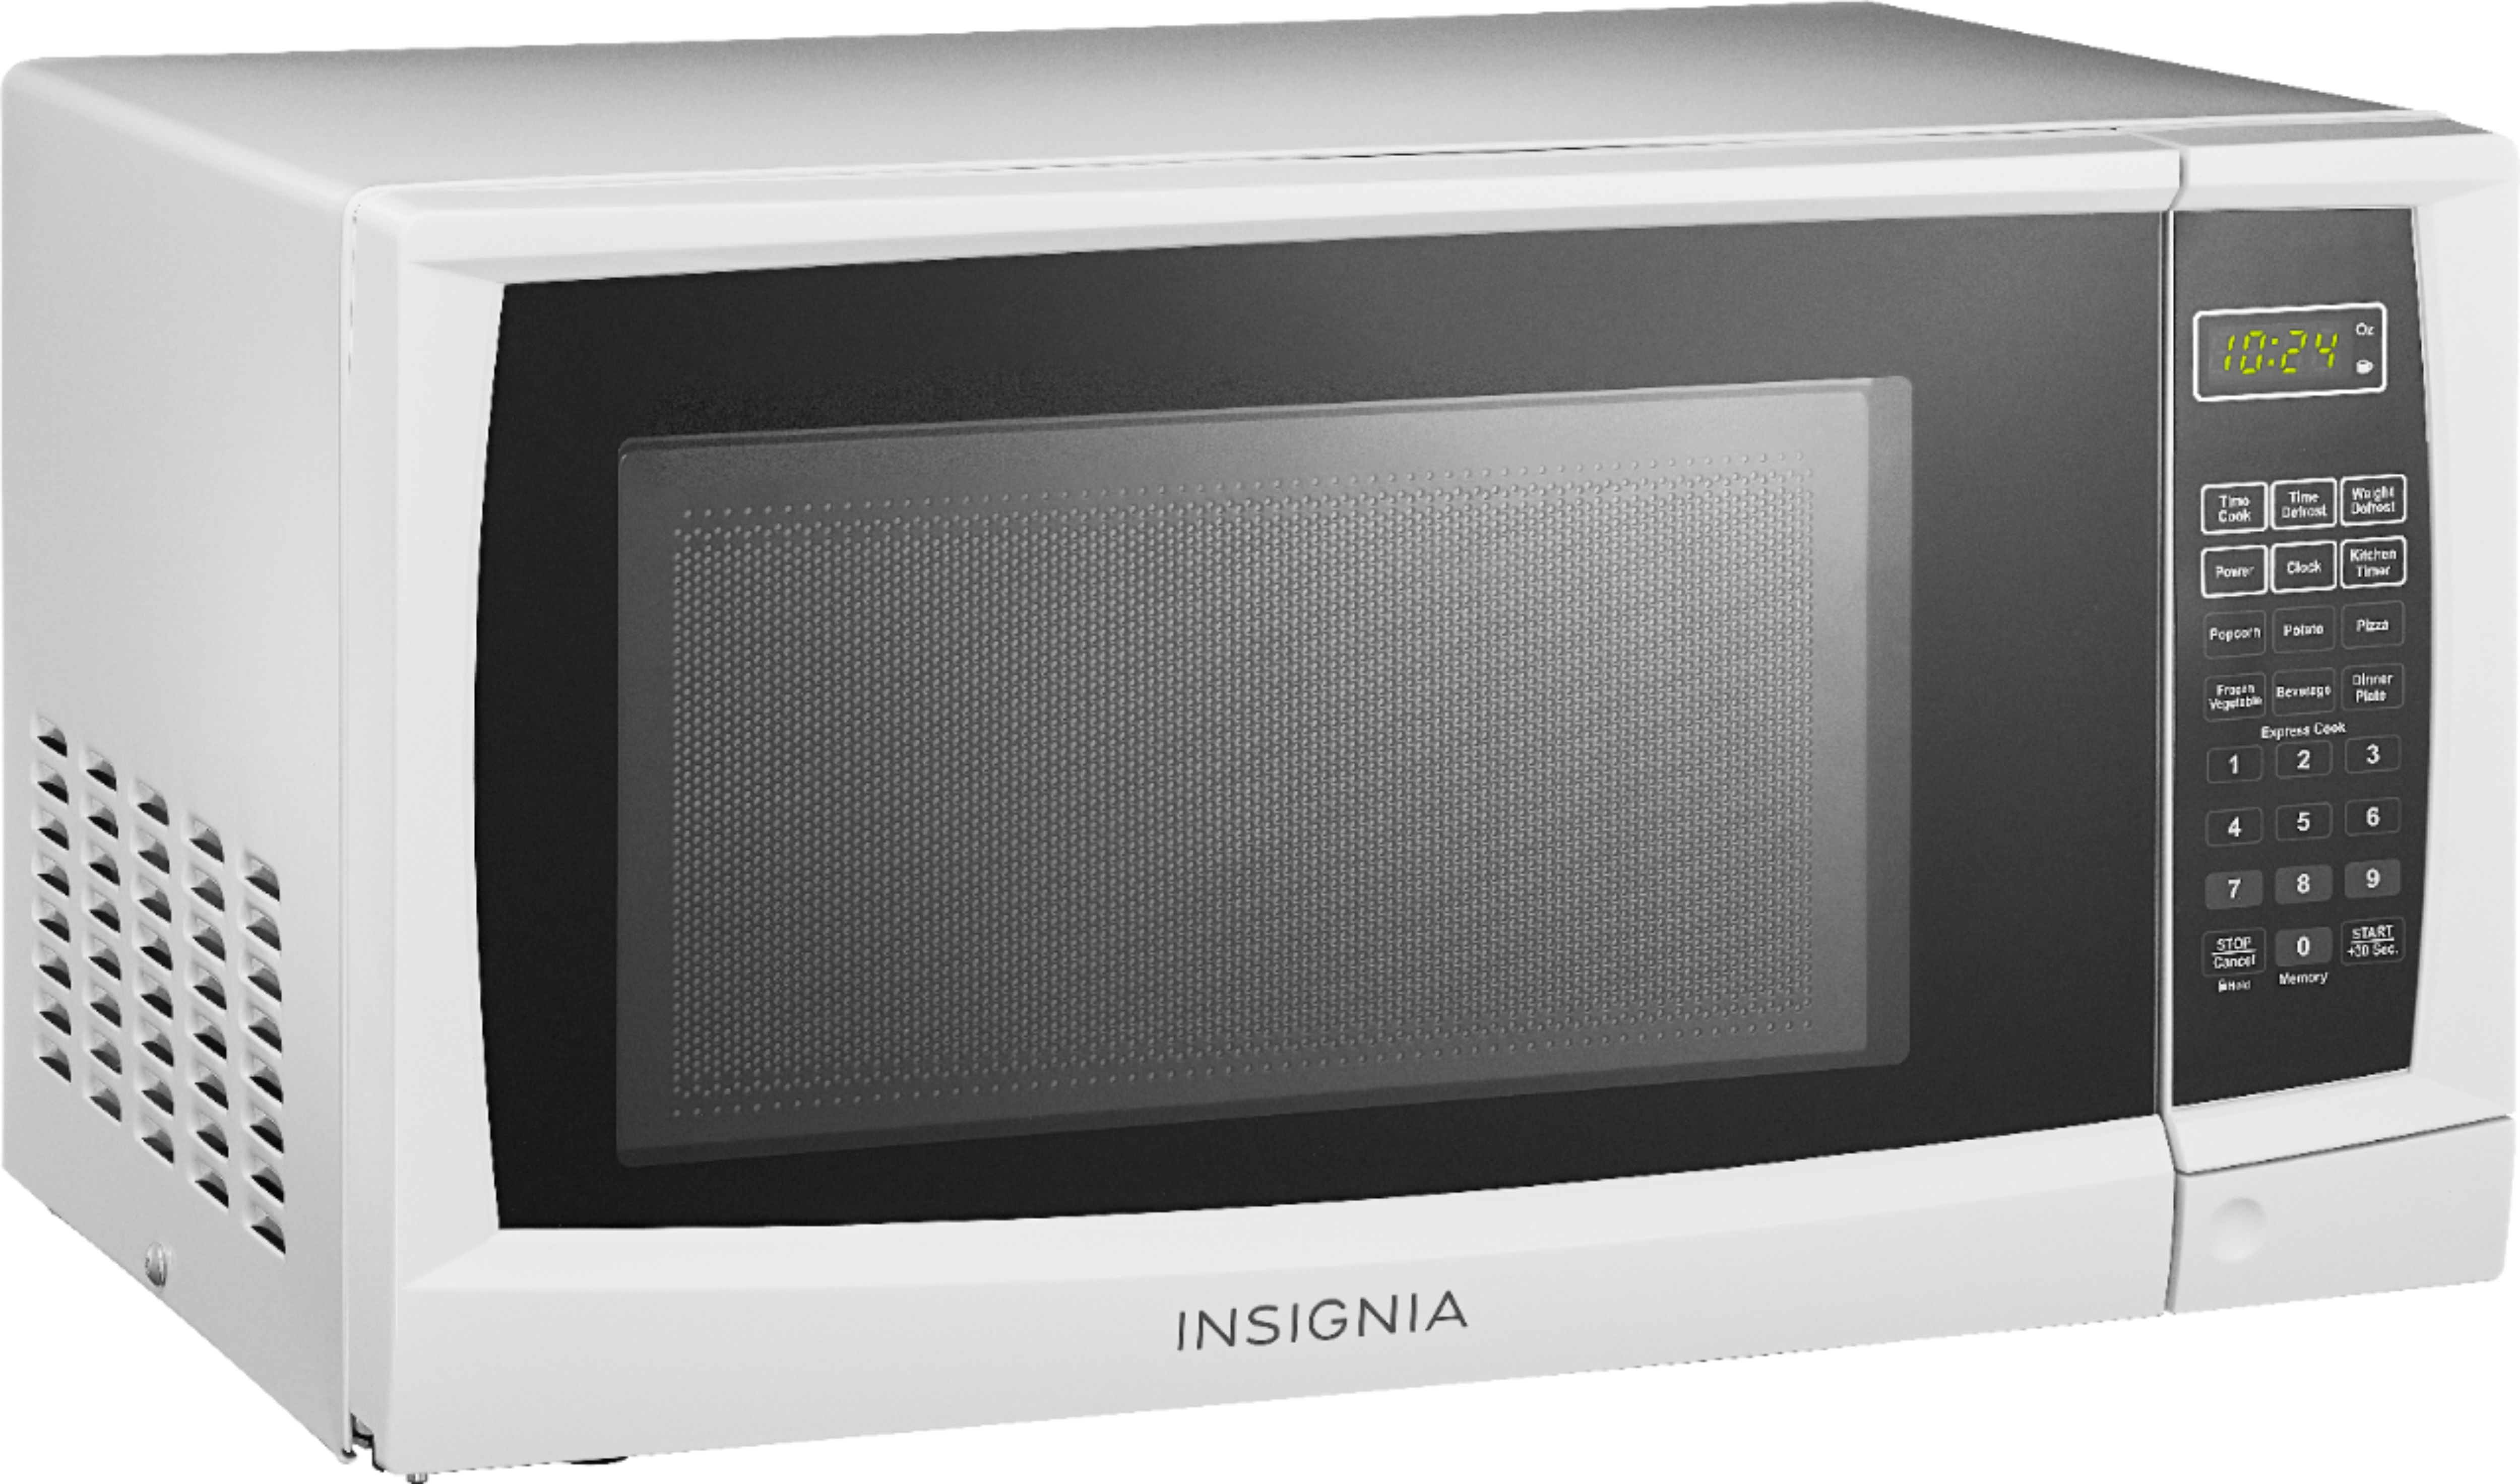 0.7 Cubic Foot Compact Microwave (White)